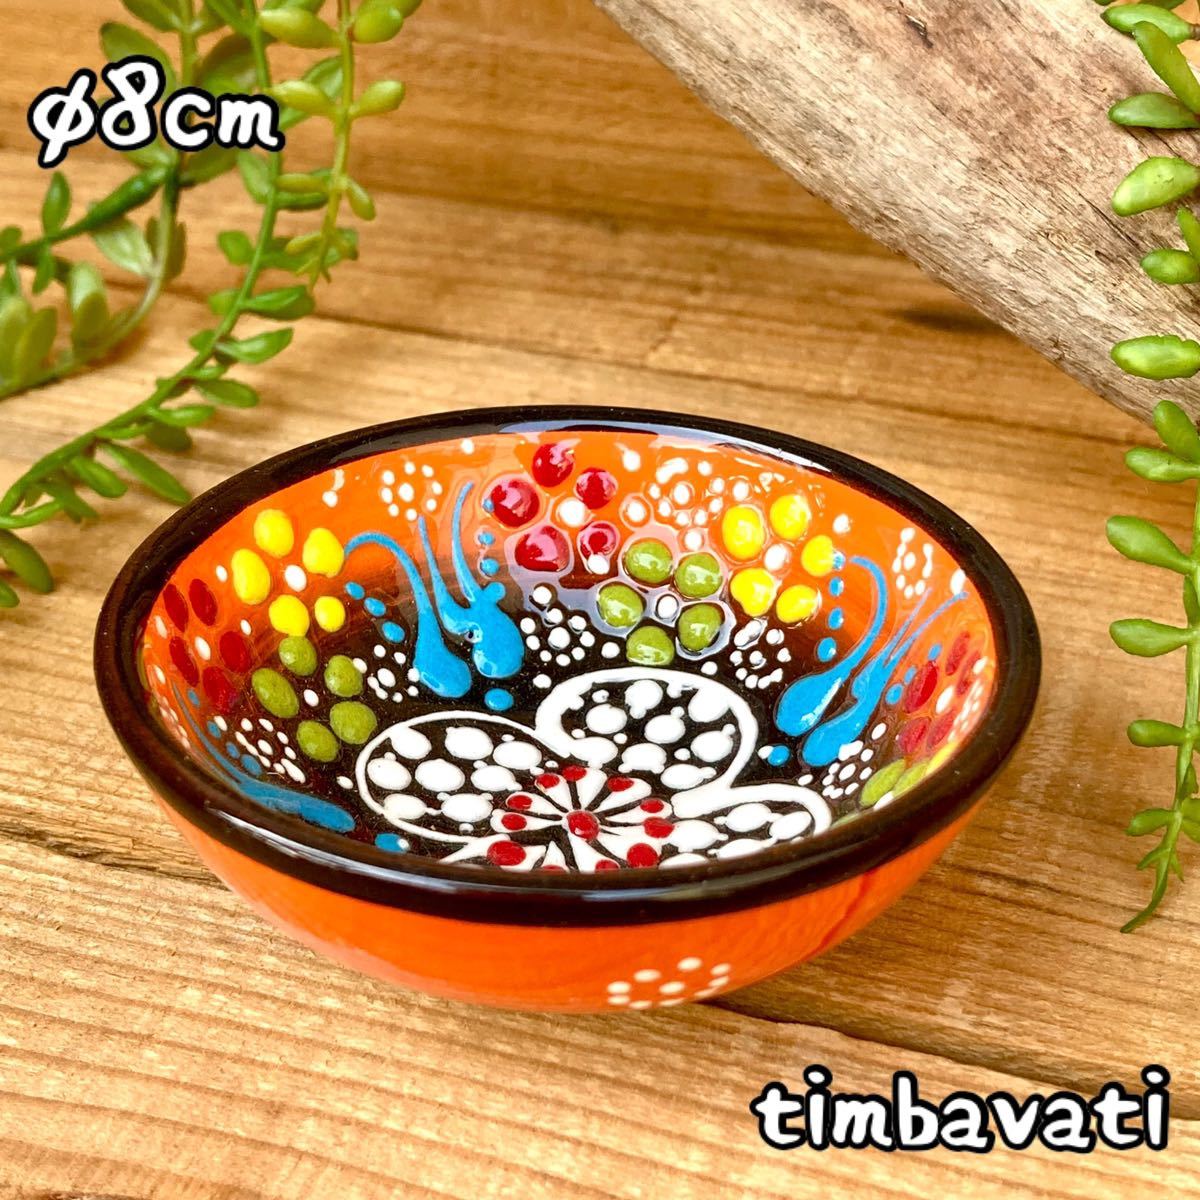 8cm☆Brand new☆Turkish pottery bowl, accessory holder, small plate, handmade, Kutahya pottery, orange [Free shipping under certain conditions] 186, Western-style tableware, bowl, others